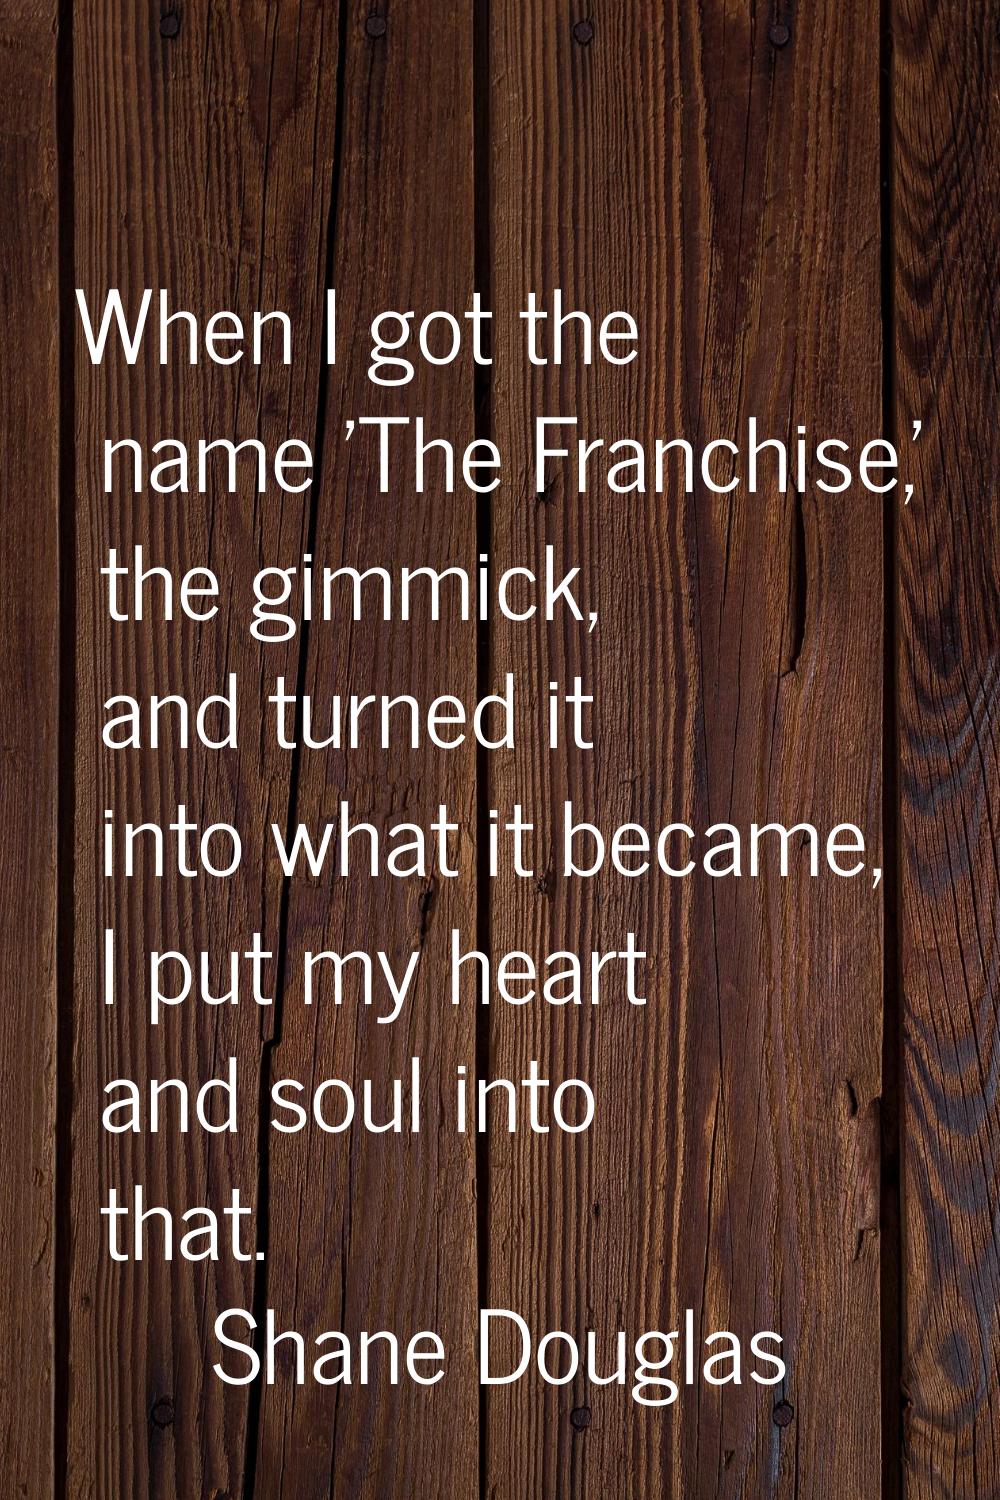 When I got the name 'The Franchise,' the gimmick, and turned it into what it became, I put my heart